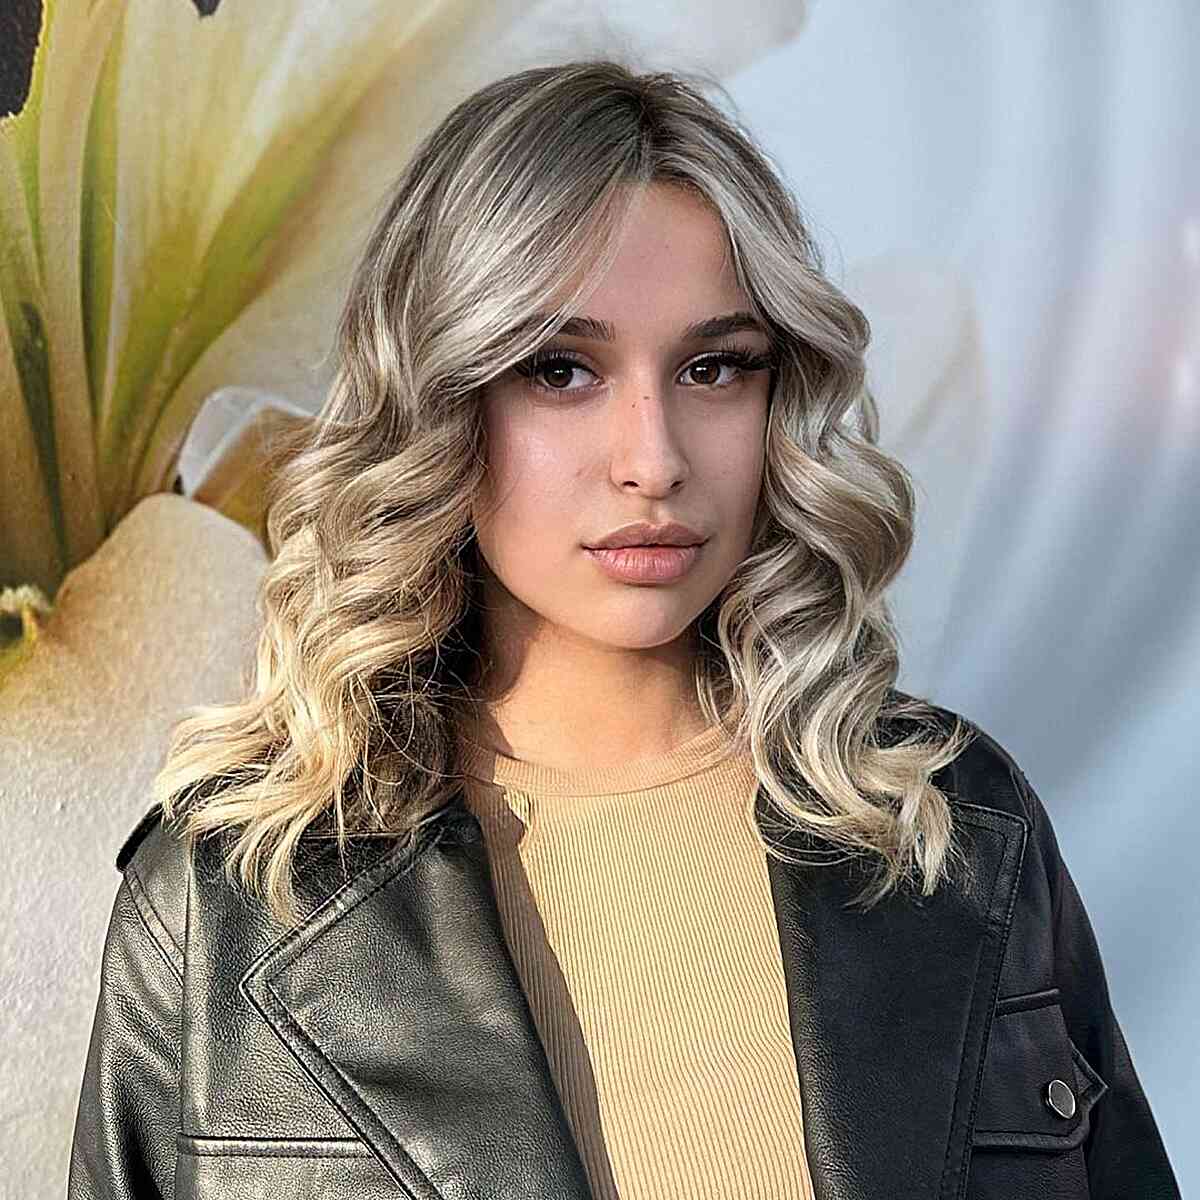 Mid-Length Middle-Parted Curled Waves for women in their 20s